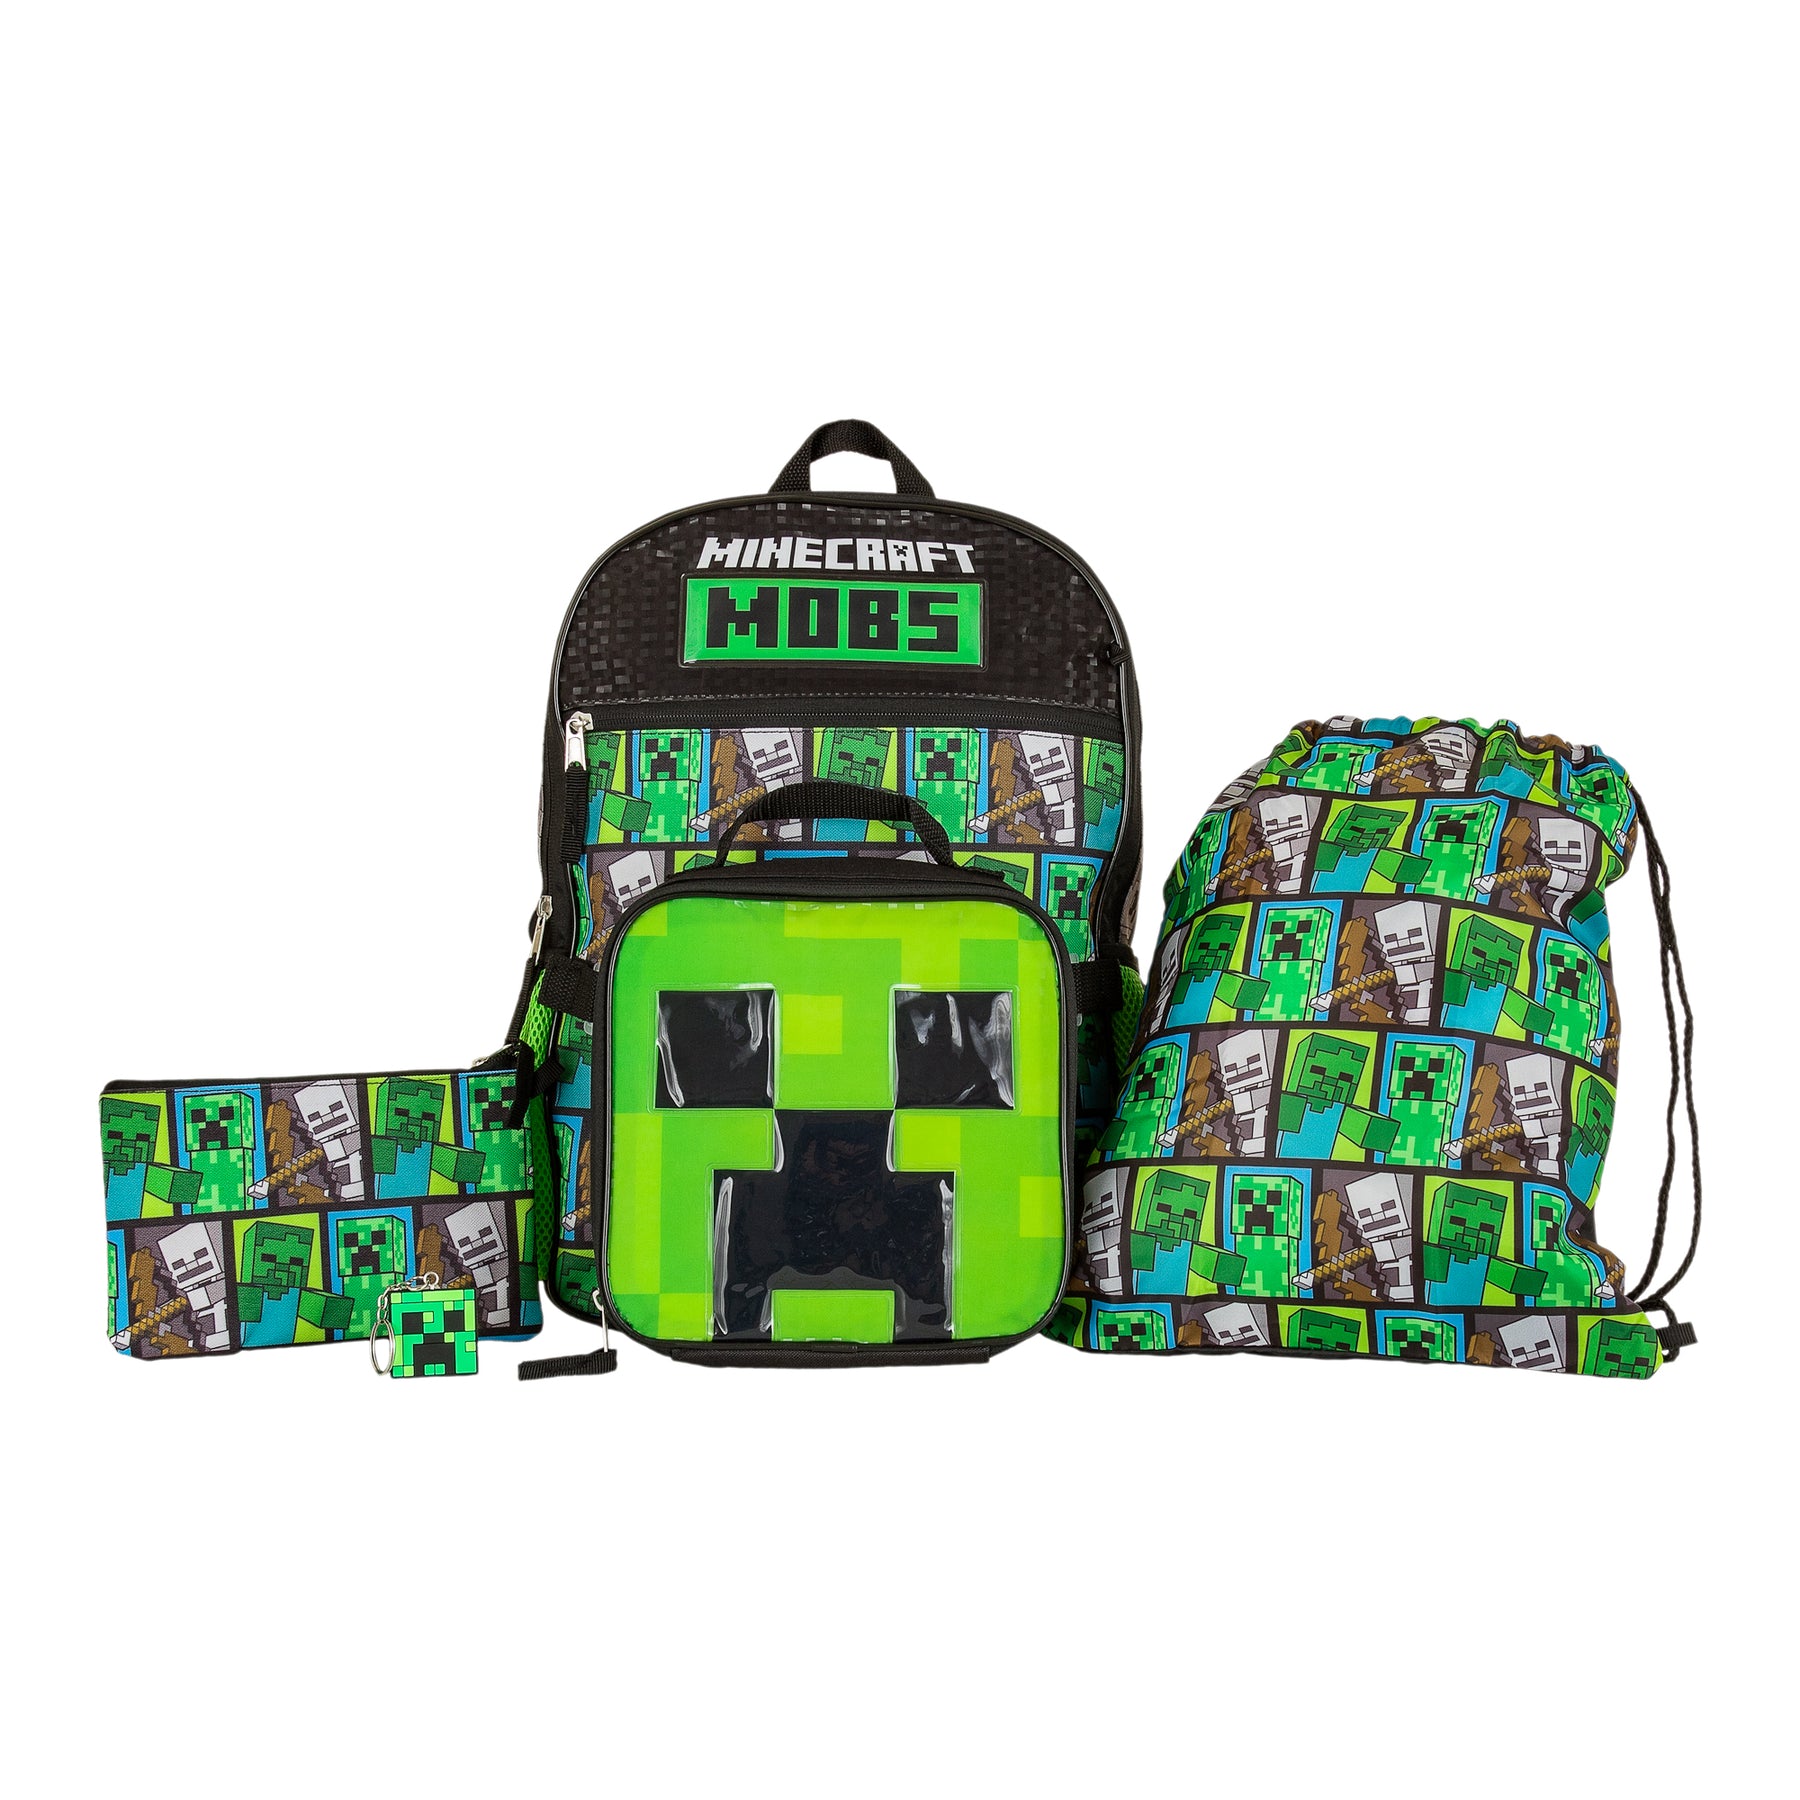 Minecraft Mobs Creeper Zombie Kids Back to School 5 Piece Backpack Set